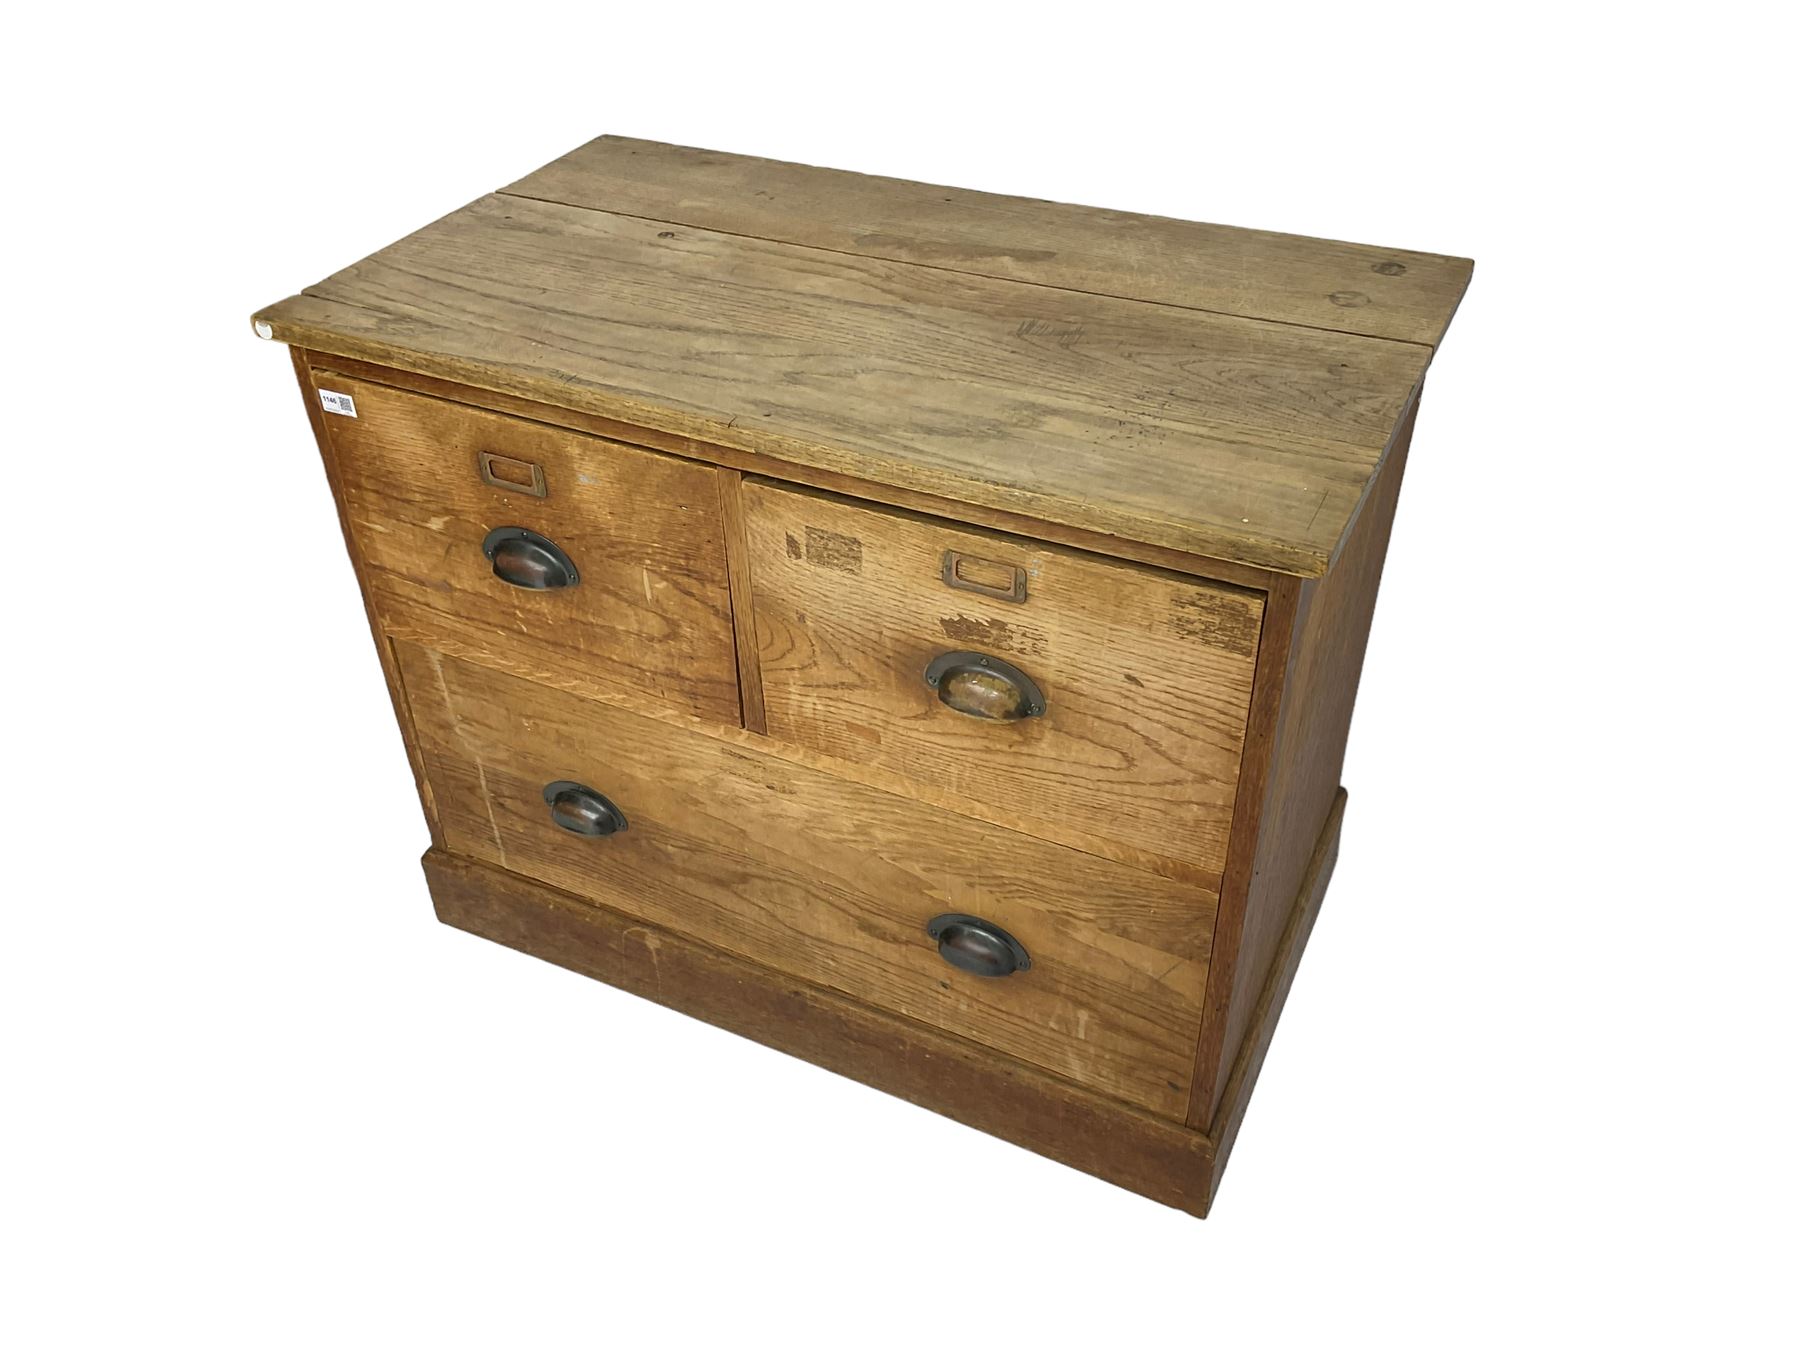 Early to mid-20th century oak chest - Image 6 of 6